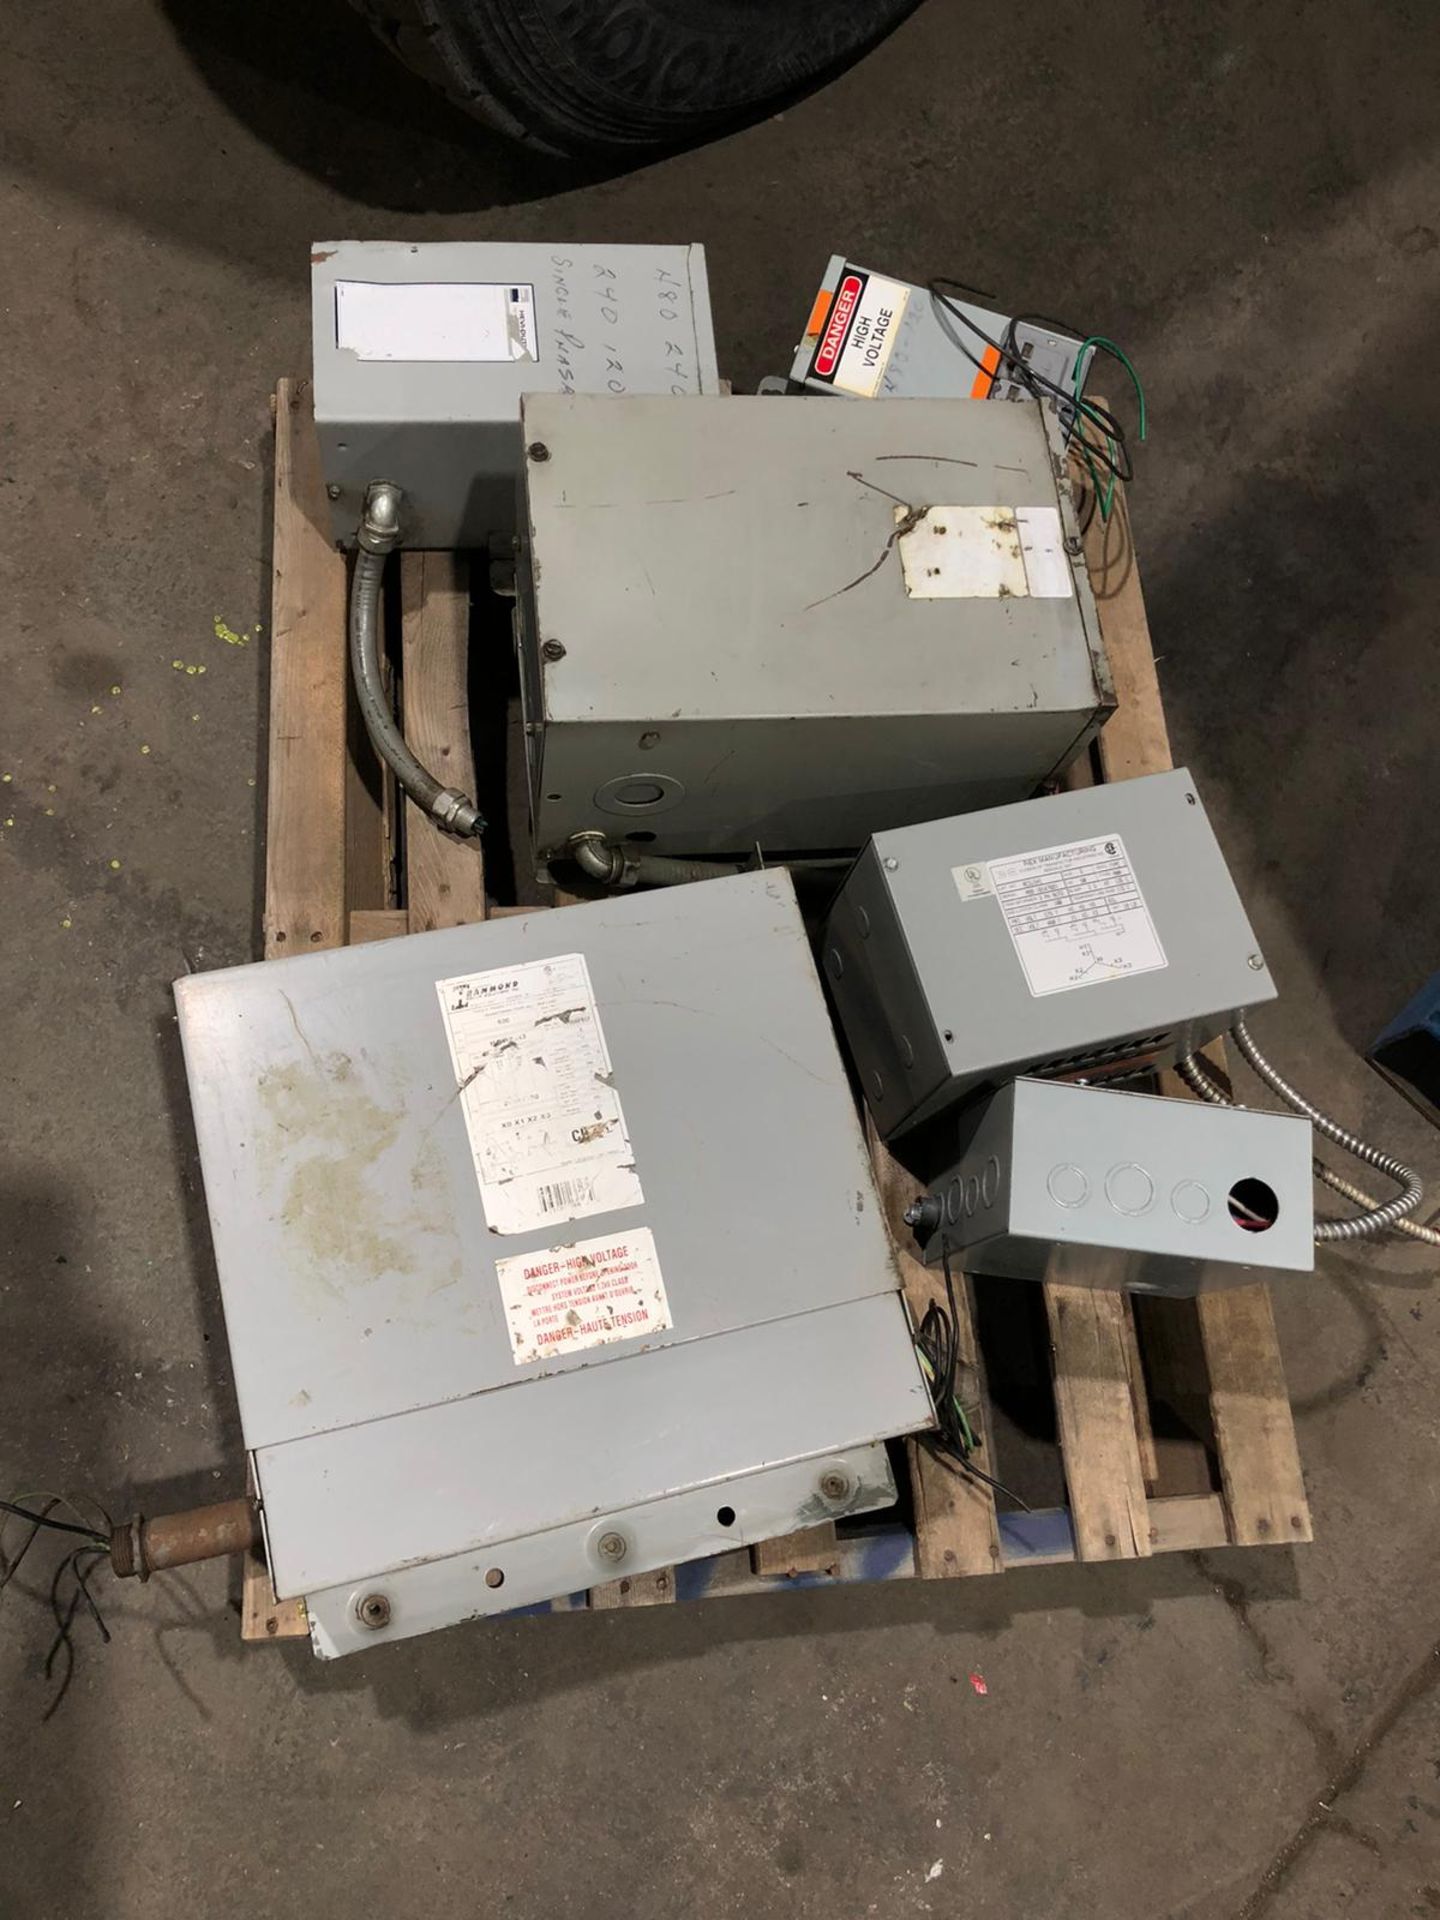 Lot of 5 (5 units) Electrical Transformers 1.5 to 5KVA units - Image 4 of 4